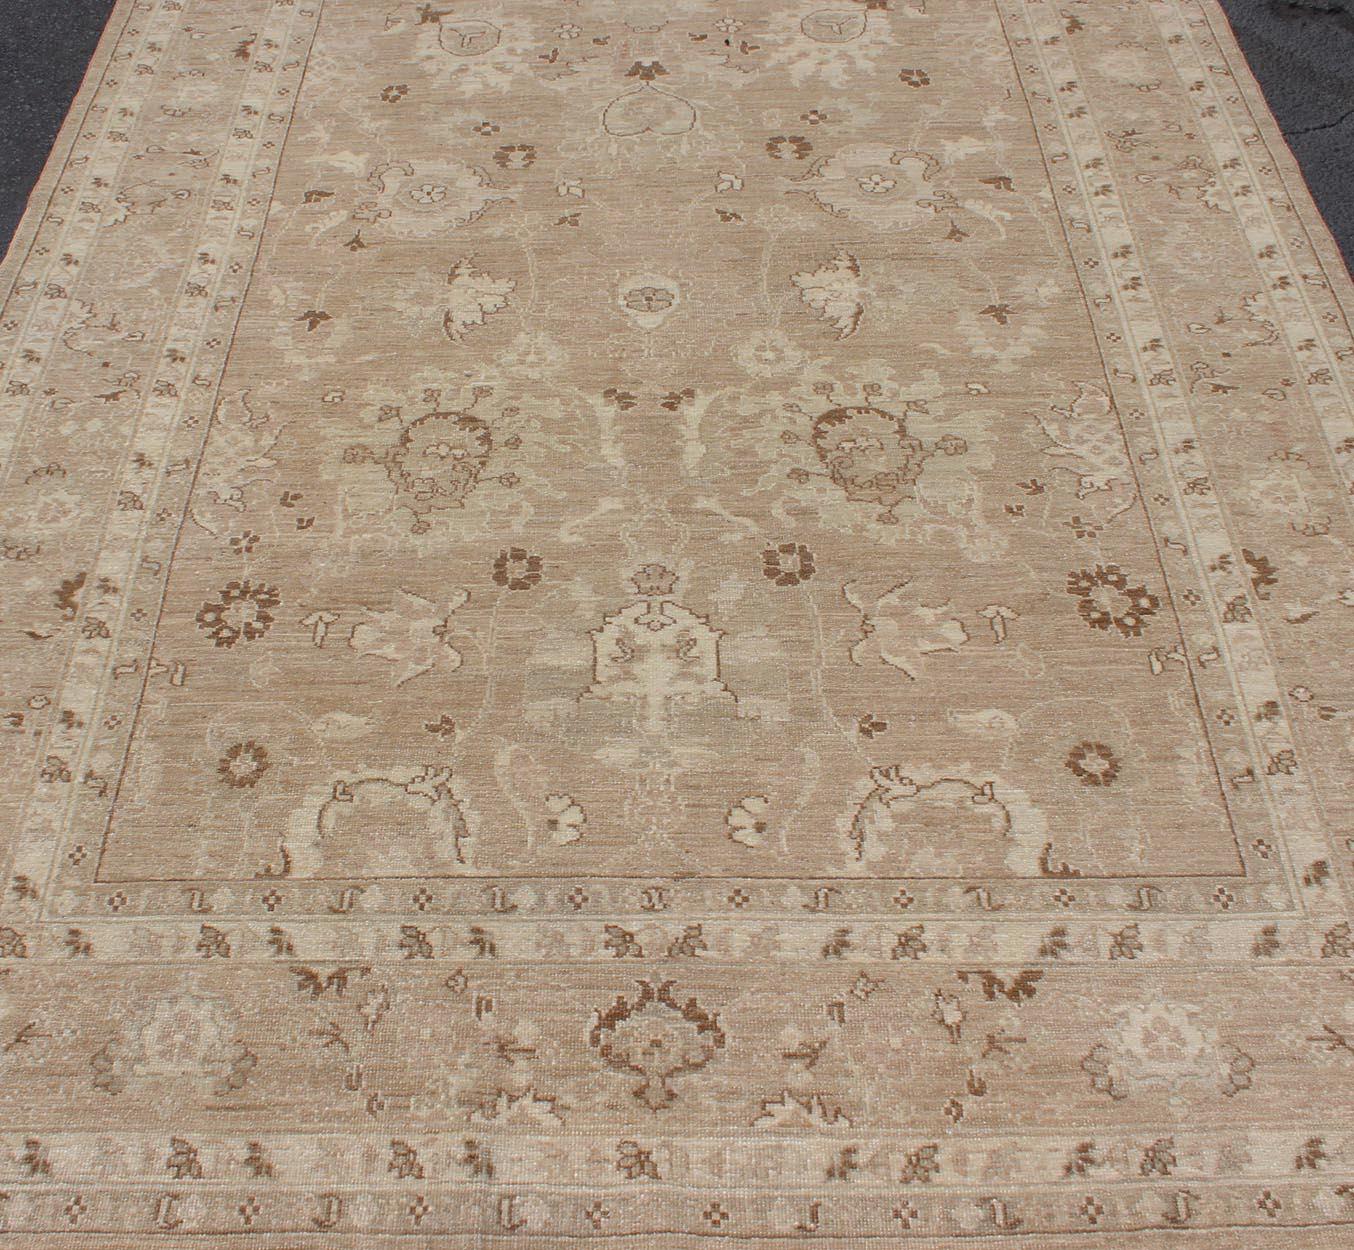 Vintage Afghan Rug in Muted Earthy Tones of Light Brown, Caramel, Light Green For Sale 3